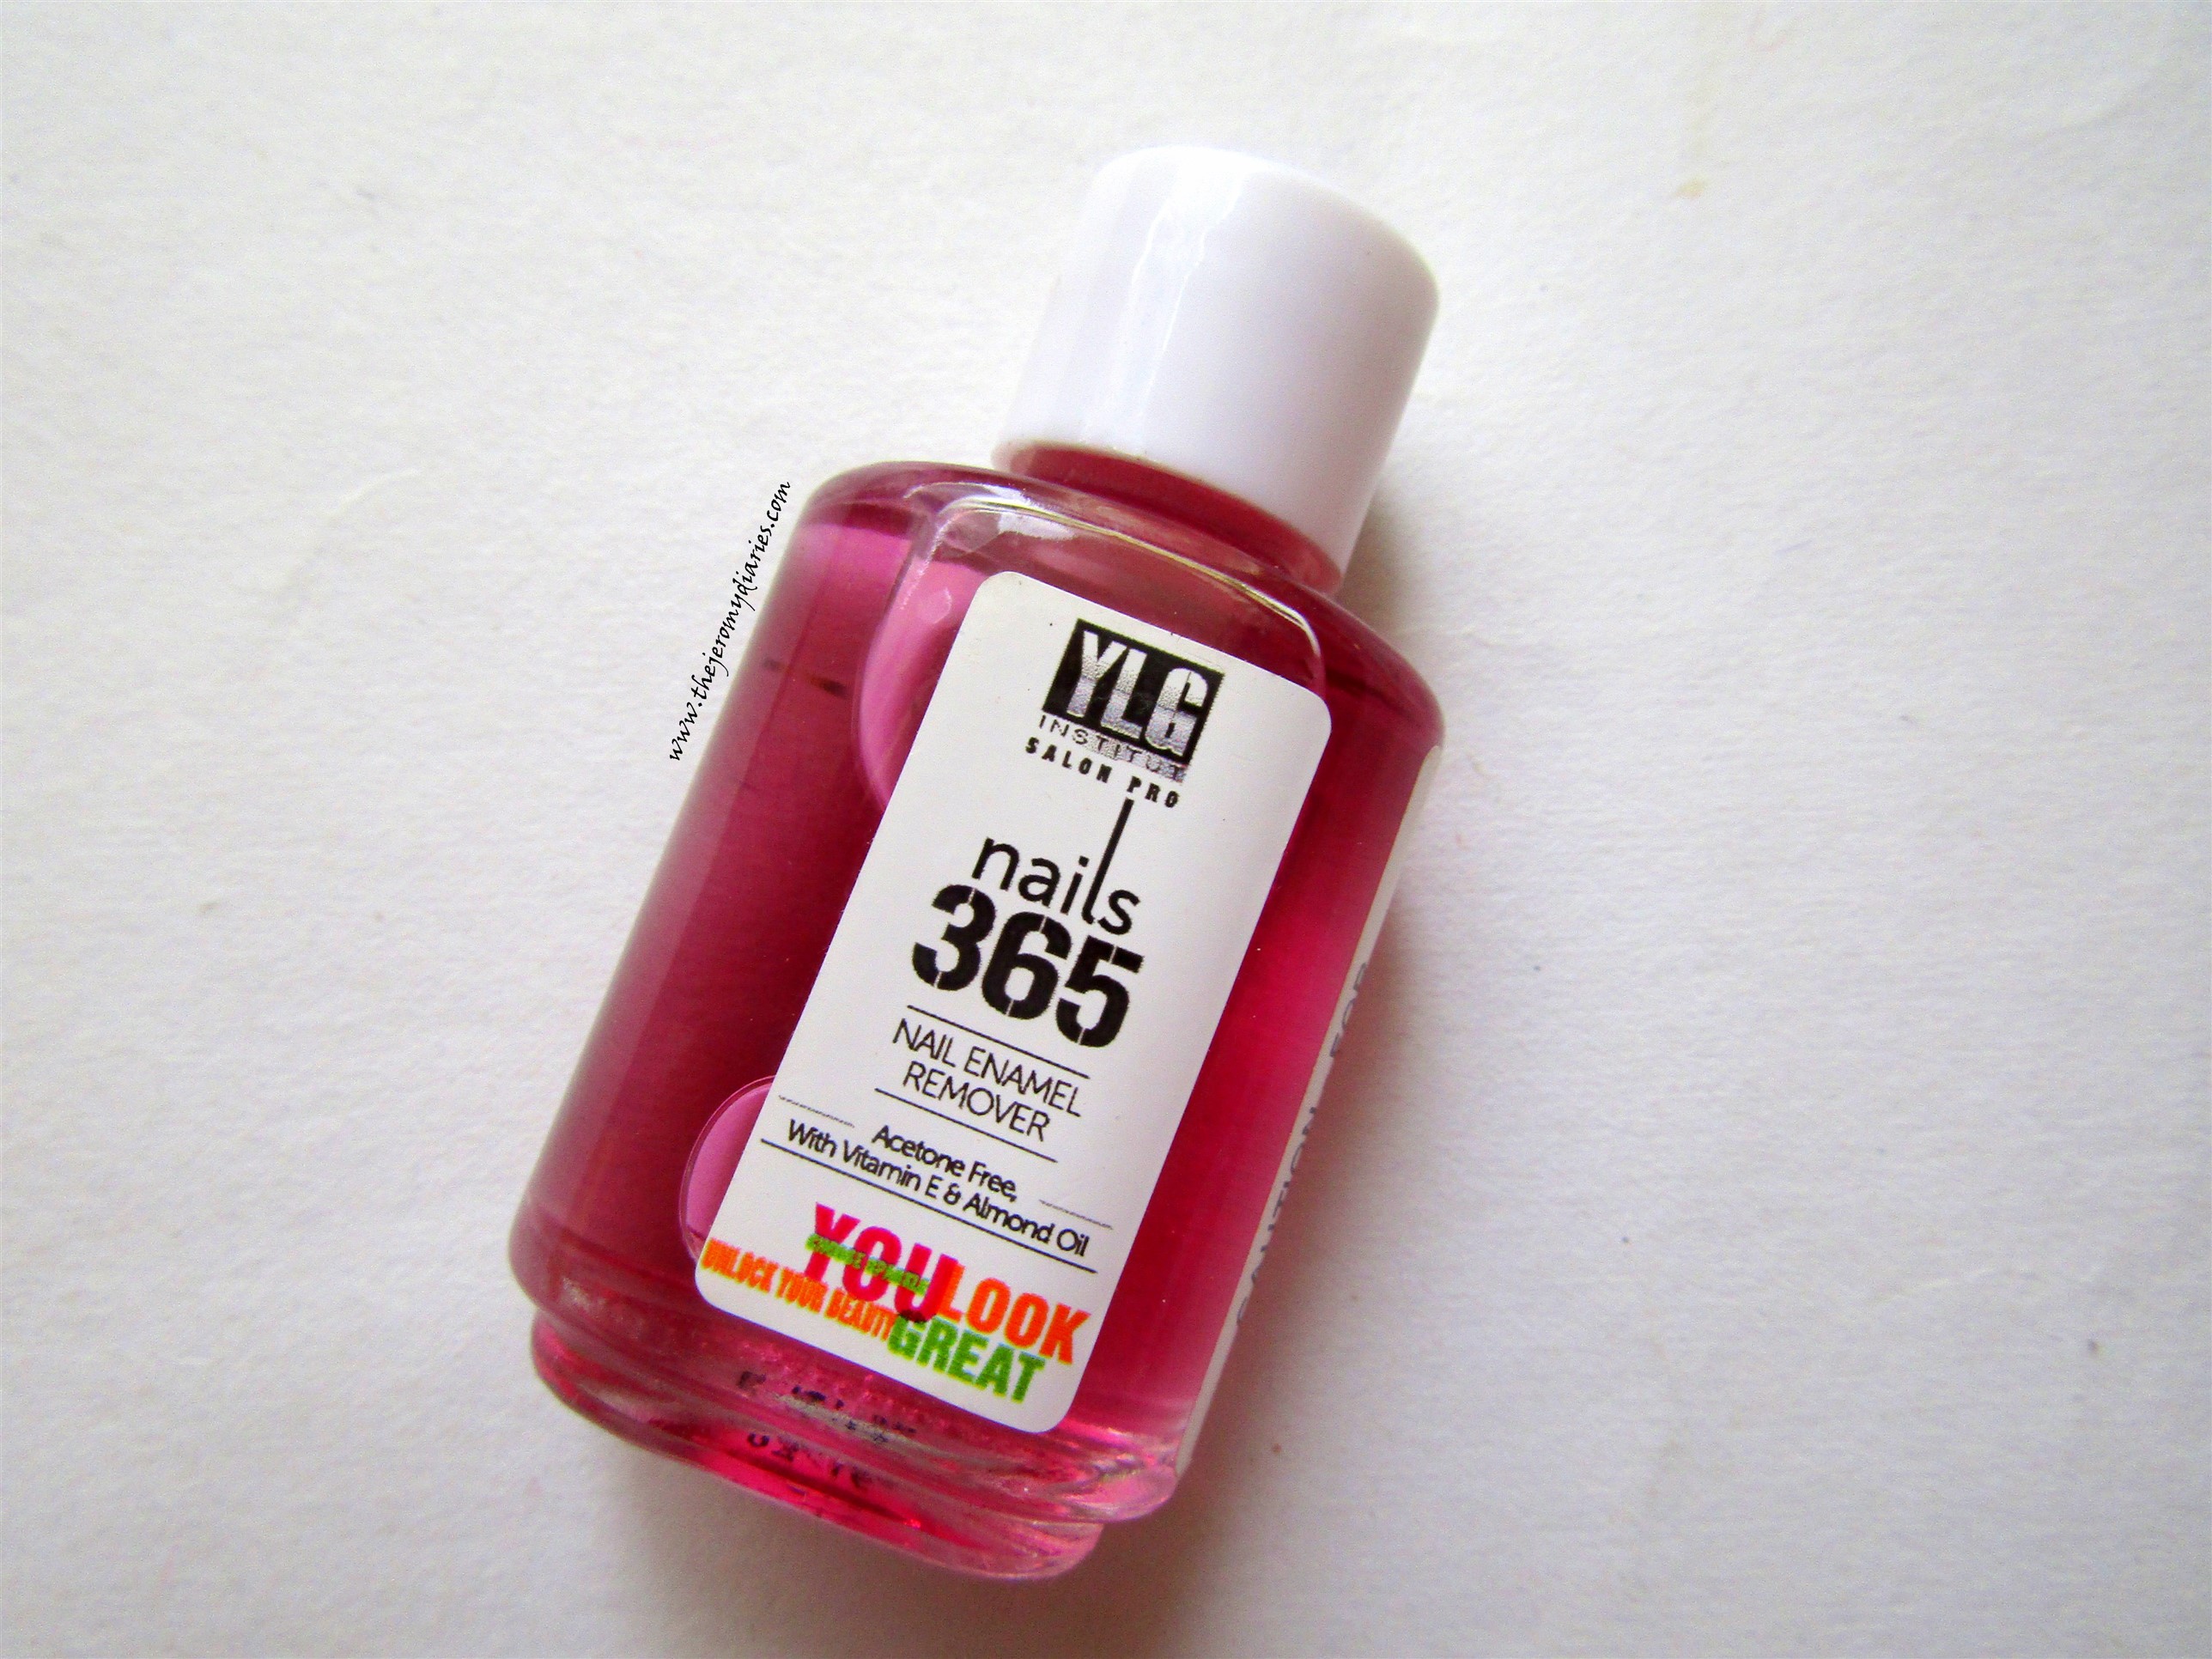 ylg nails 365 nail enamel remover the jeromy diaries